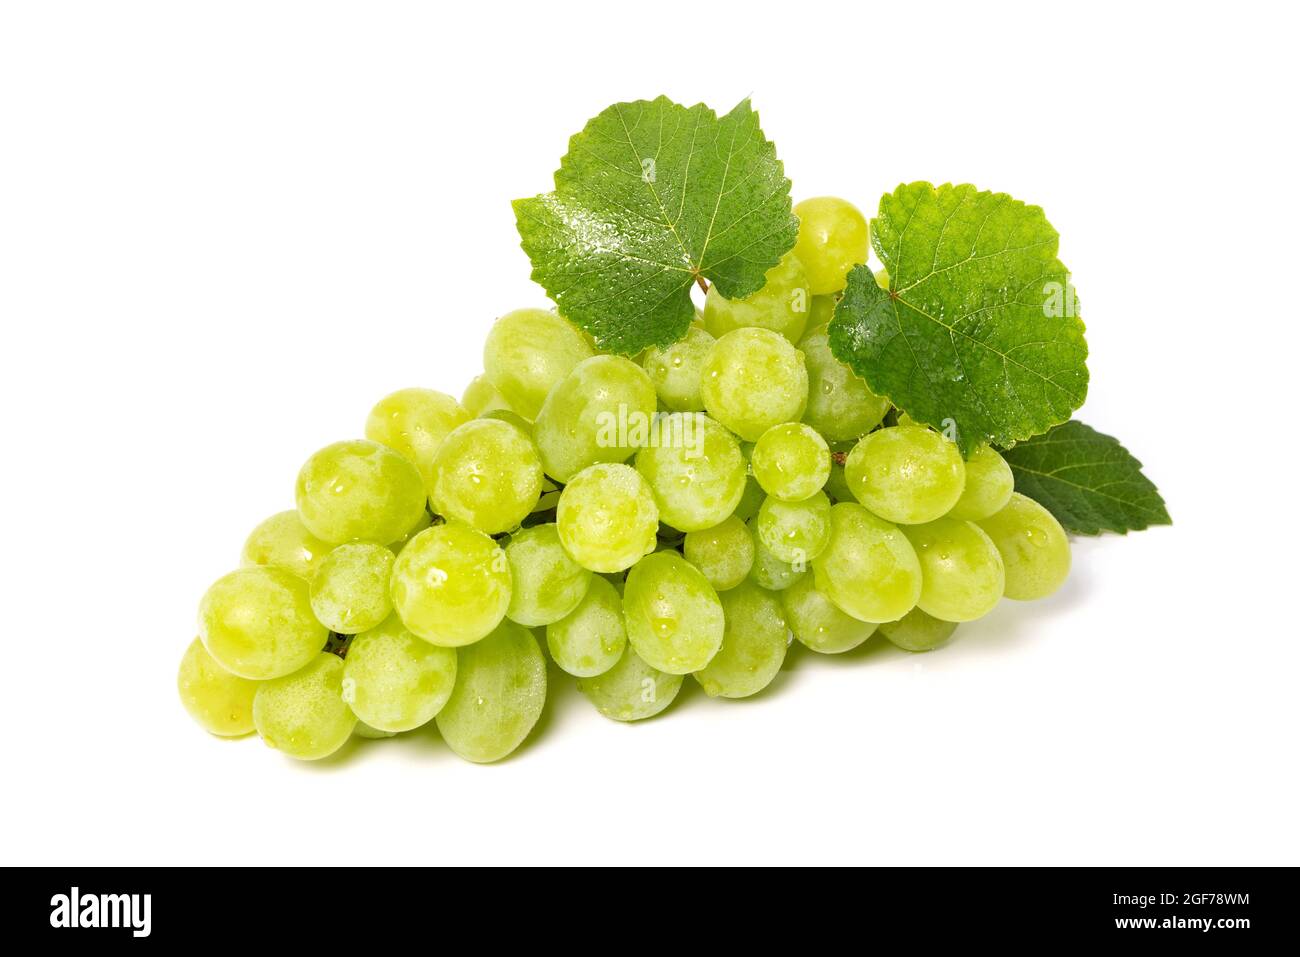 cluster of grapes with green leaves isolated on white background Stock Photo